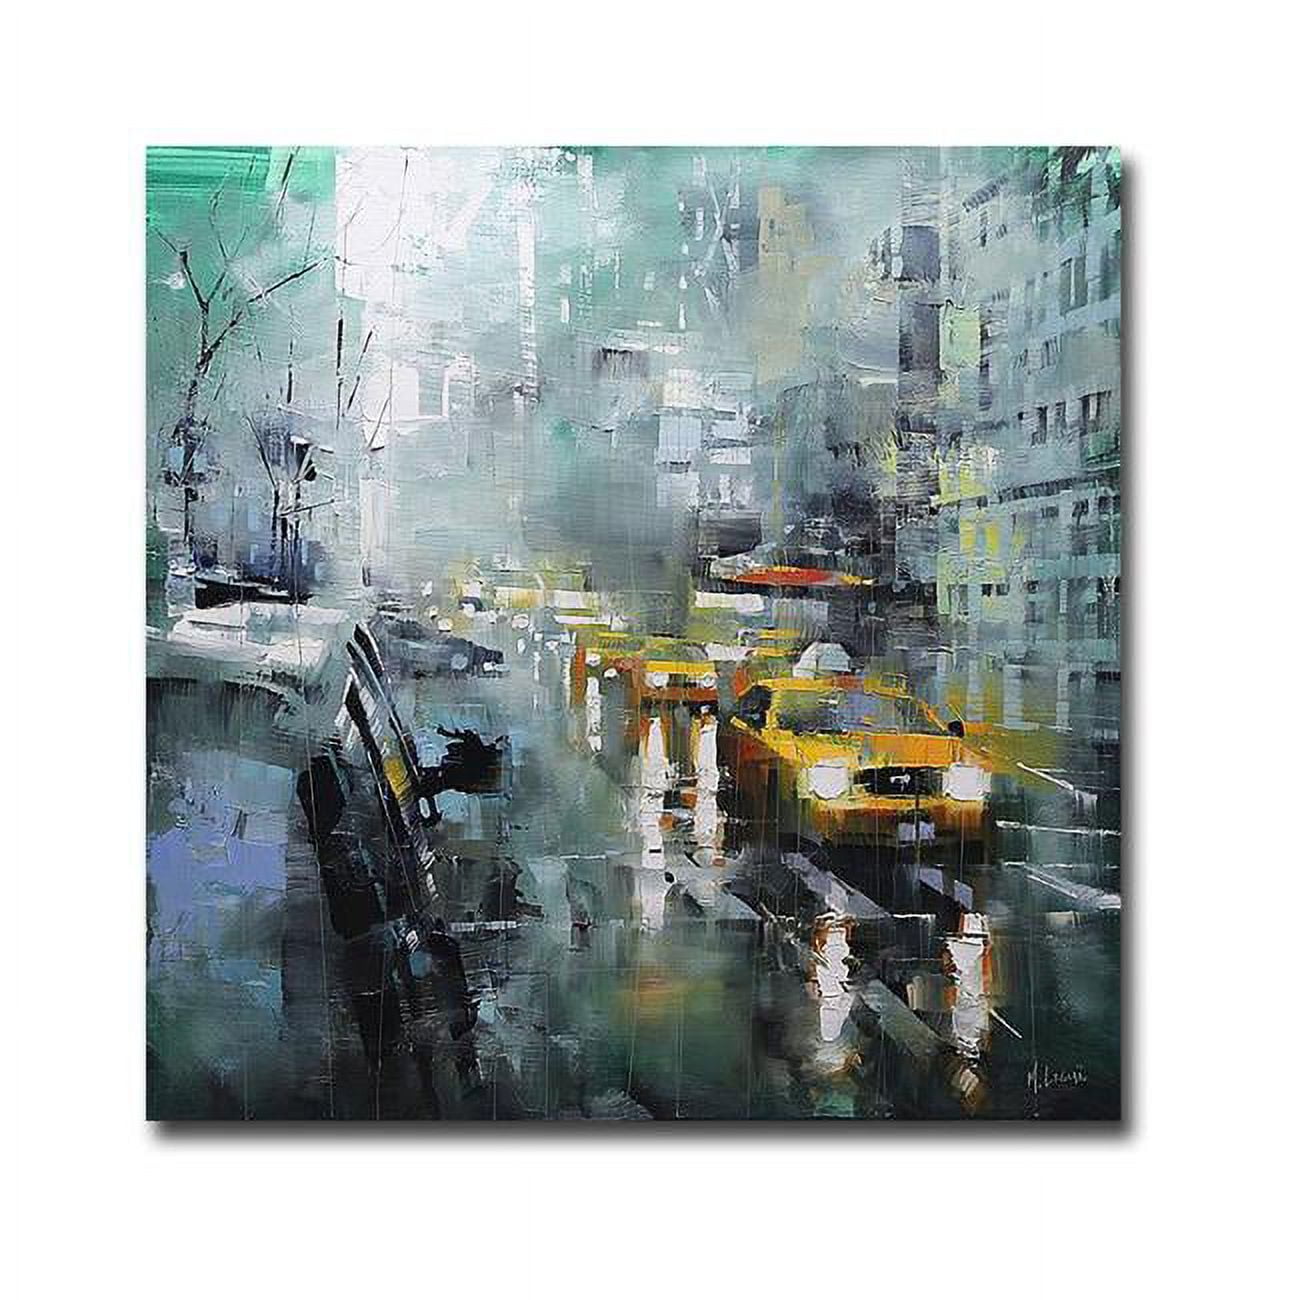 1212h475ig New York Rain By Mark Lague Premium Gallery-wrapped Canvas Giclee Art - 12 X 12 X 1.5 In.